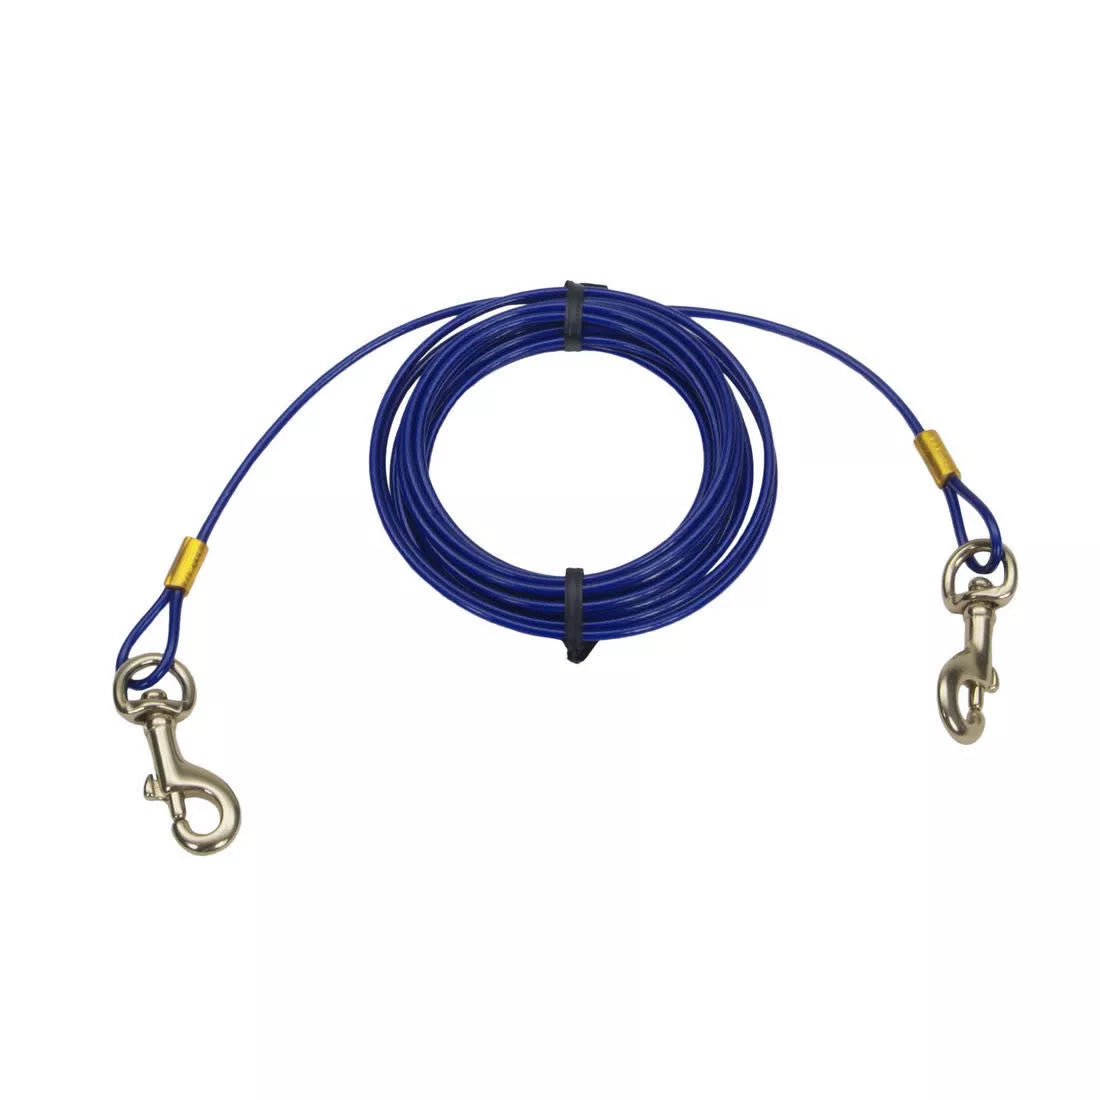 Titan Medium Cable Dog Tie Out